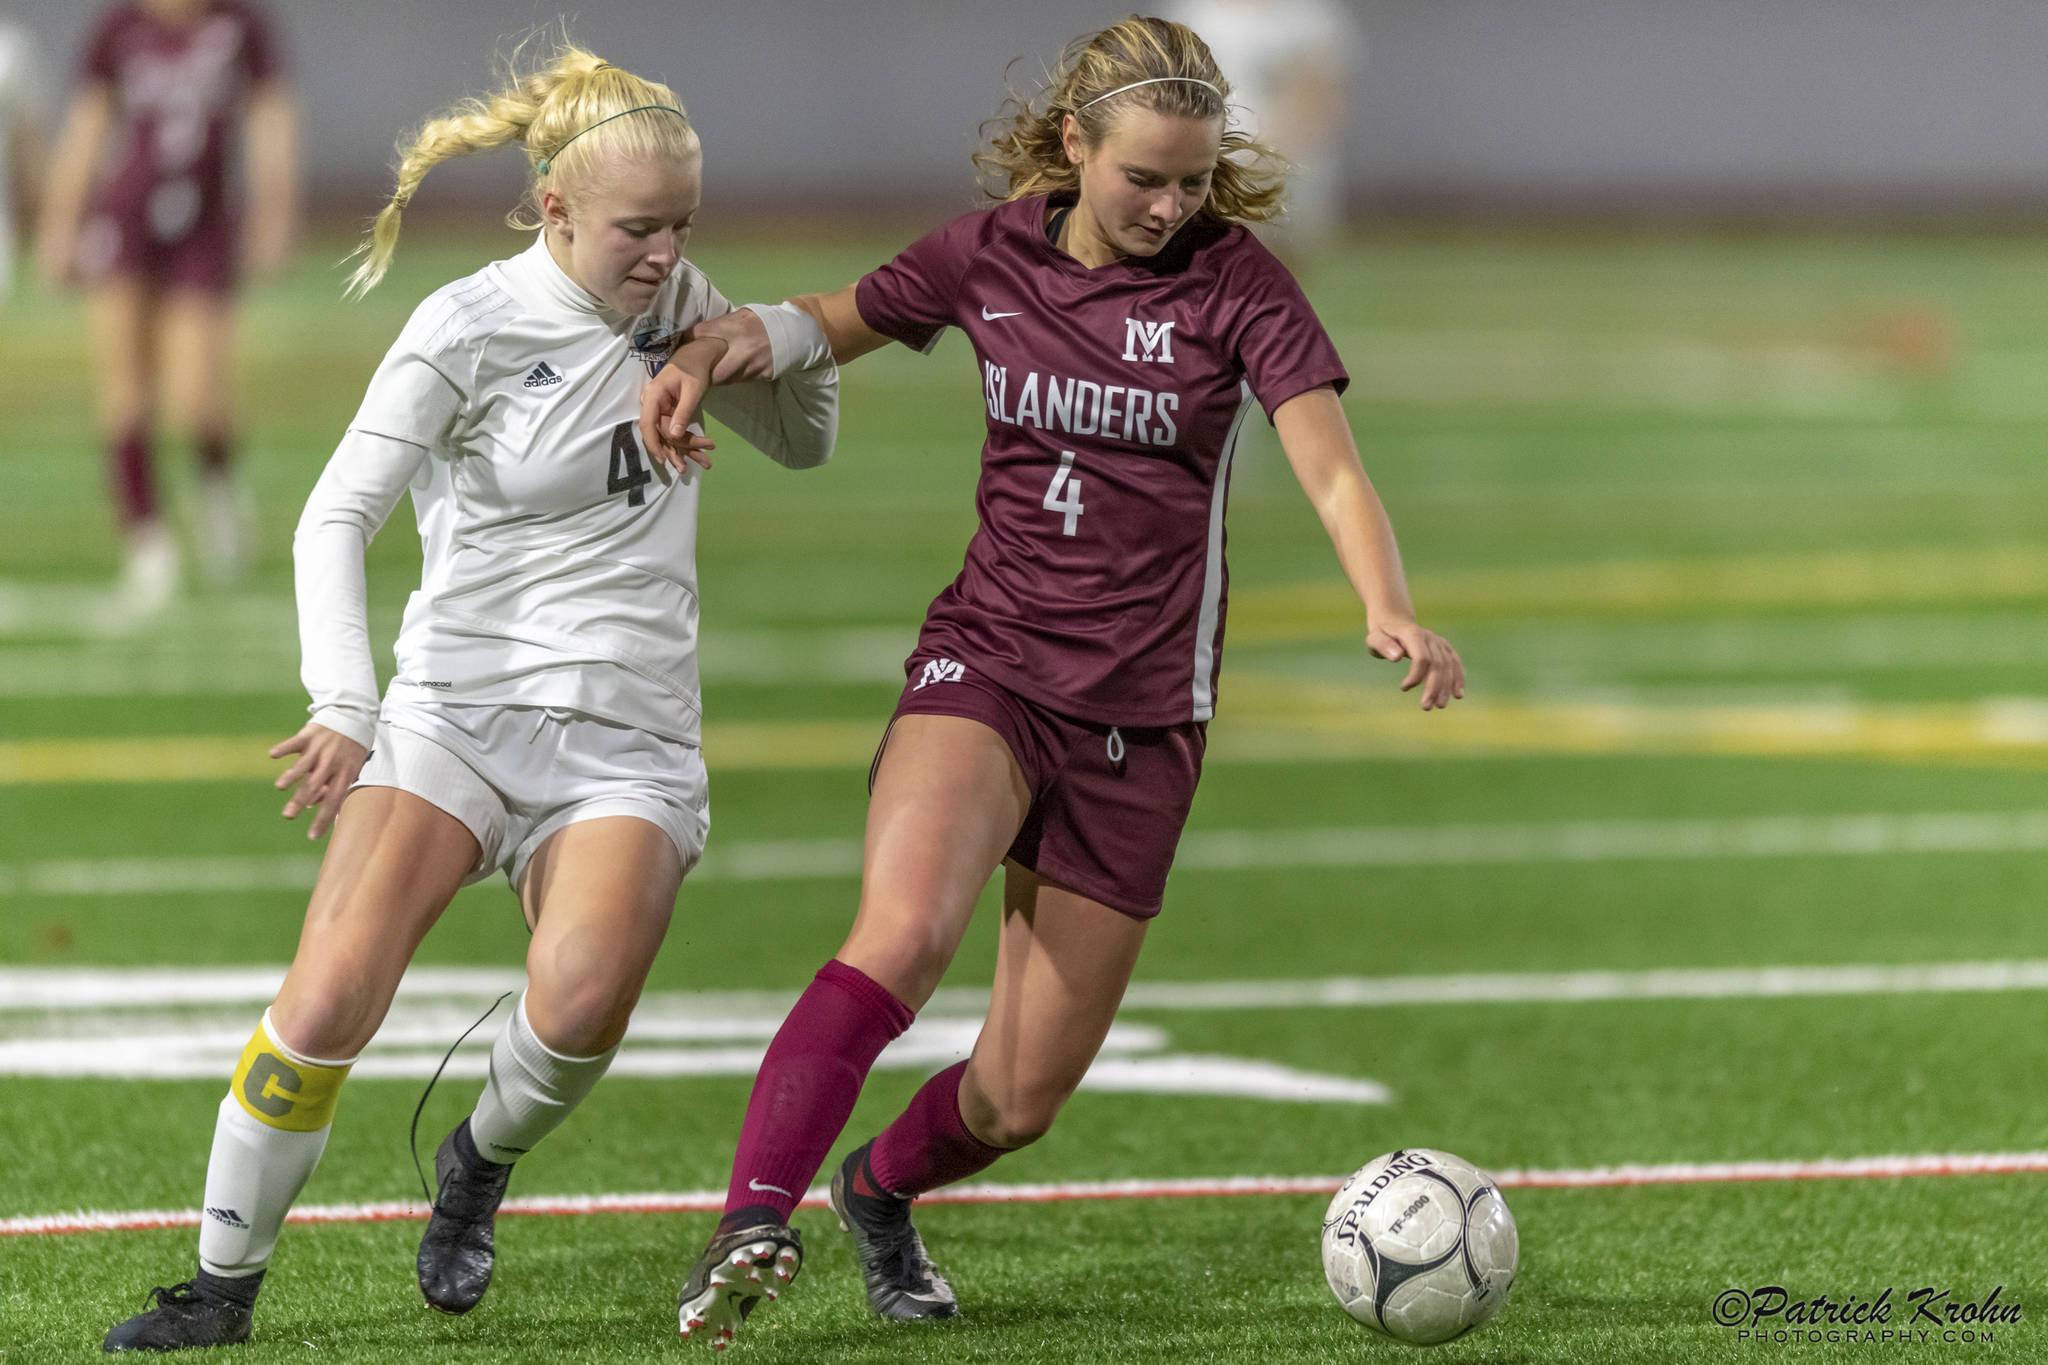 Mercer Island senior midfielder Jackie Stenberg, right, tries to keep the ball away from Bonney Lake midfielder Summer Kober, left, in the first round of the Class 3A state playoffs on Nov. 6 at Mercer Island High School. Photo courtesy of Patrick Krohn/Patrick Krohn Photography